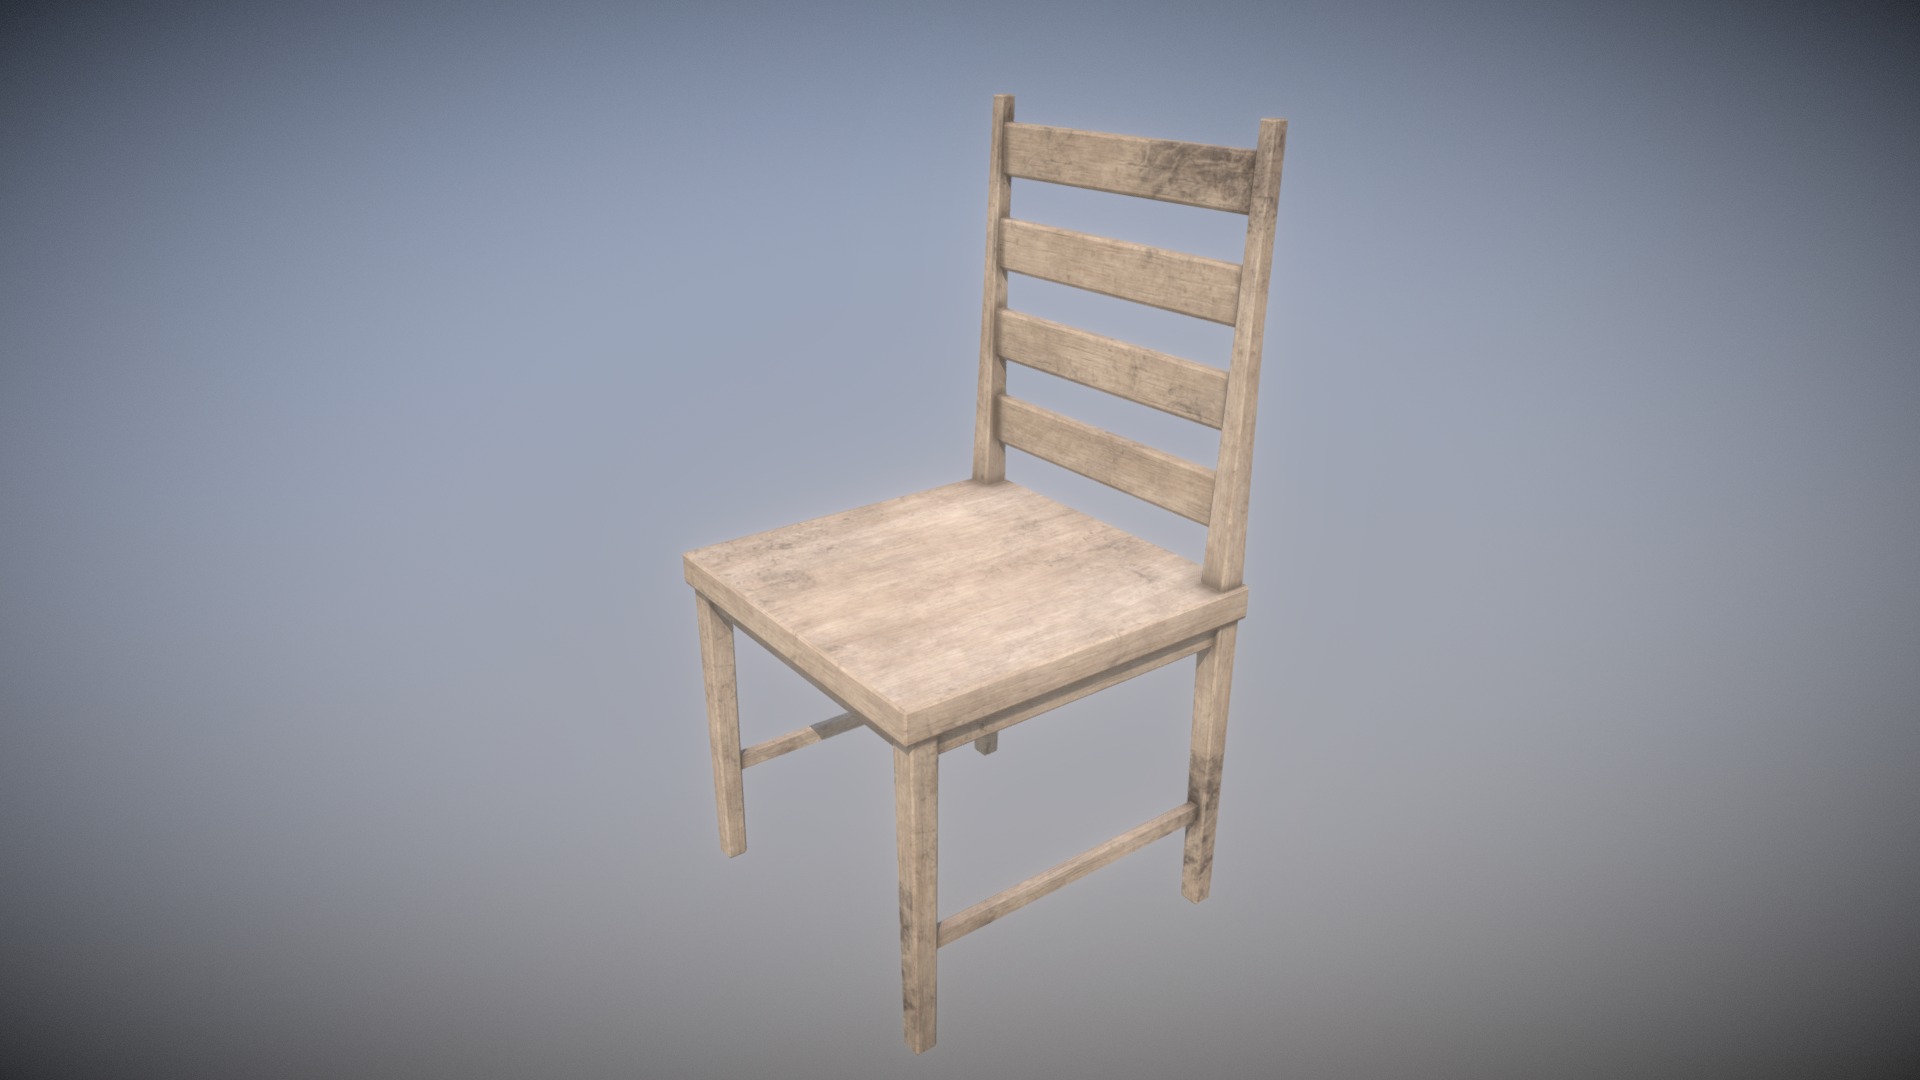 3D model Game Ready Wooden Chair Beech Low Poly - This is a 3D model of the Game Ready Wooden Chair Beech Low Poly. The 3D model is about a wooden chair against a blue background.